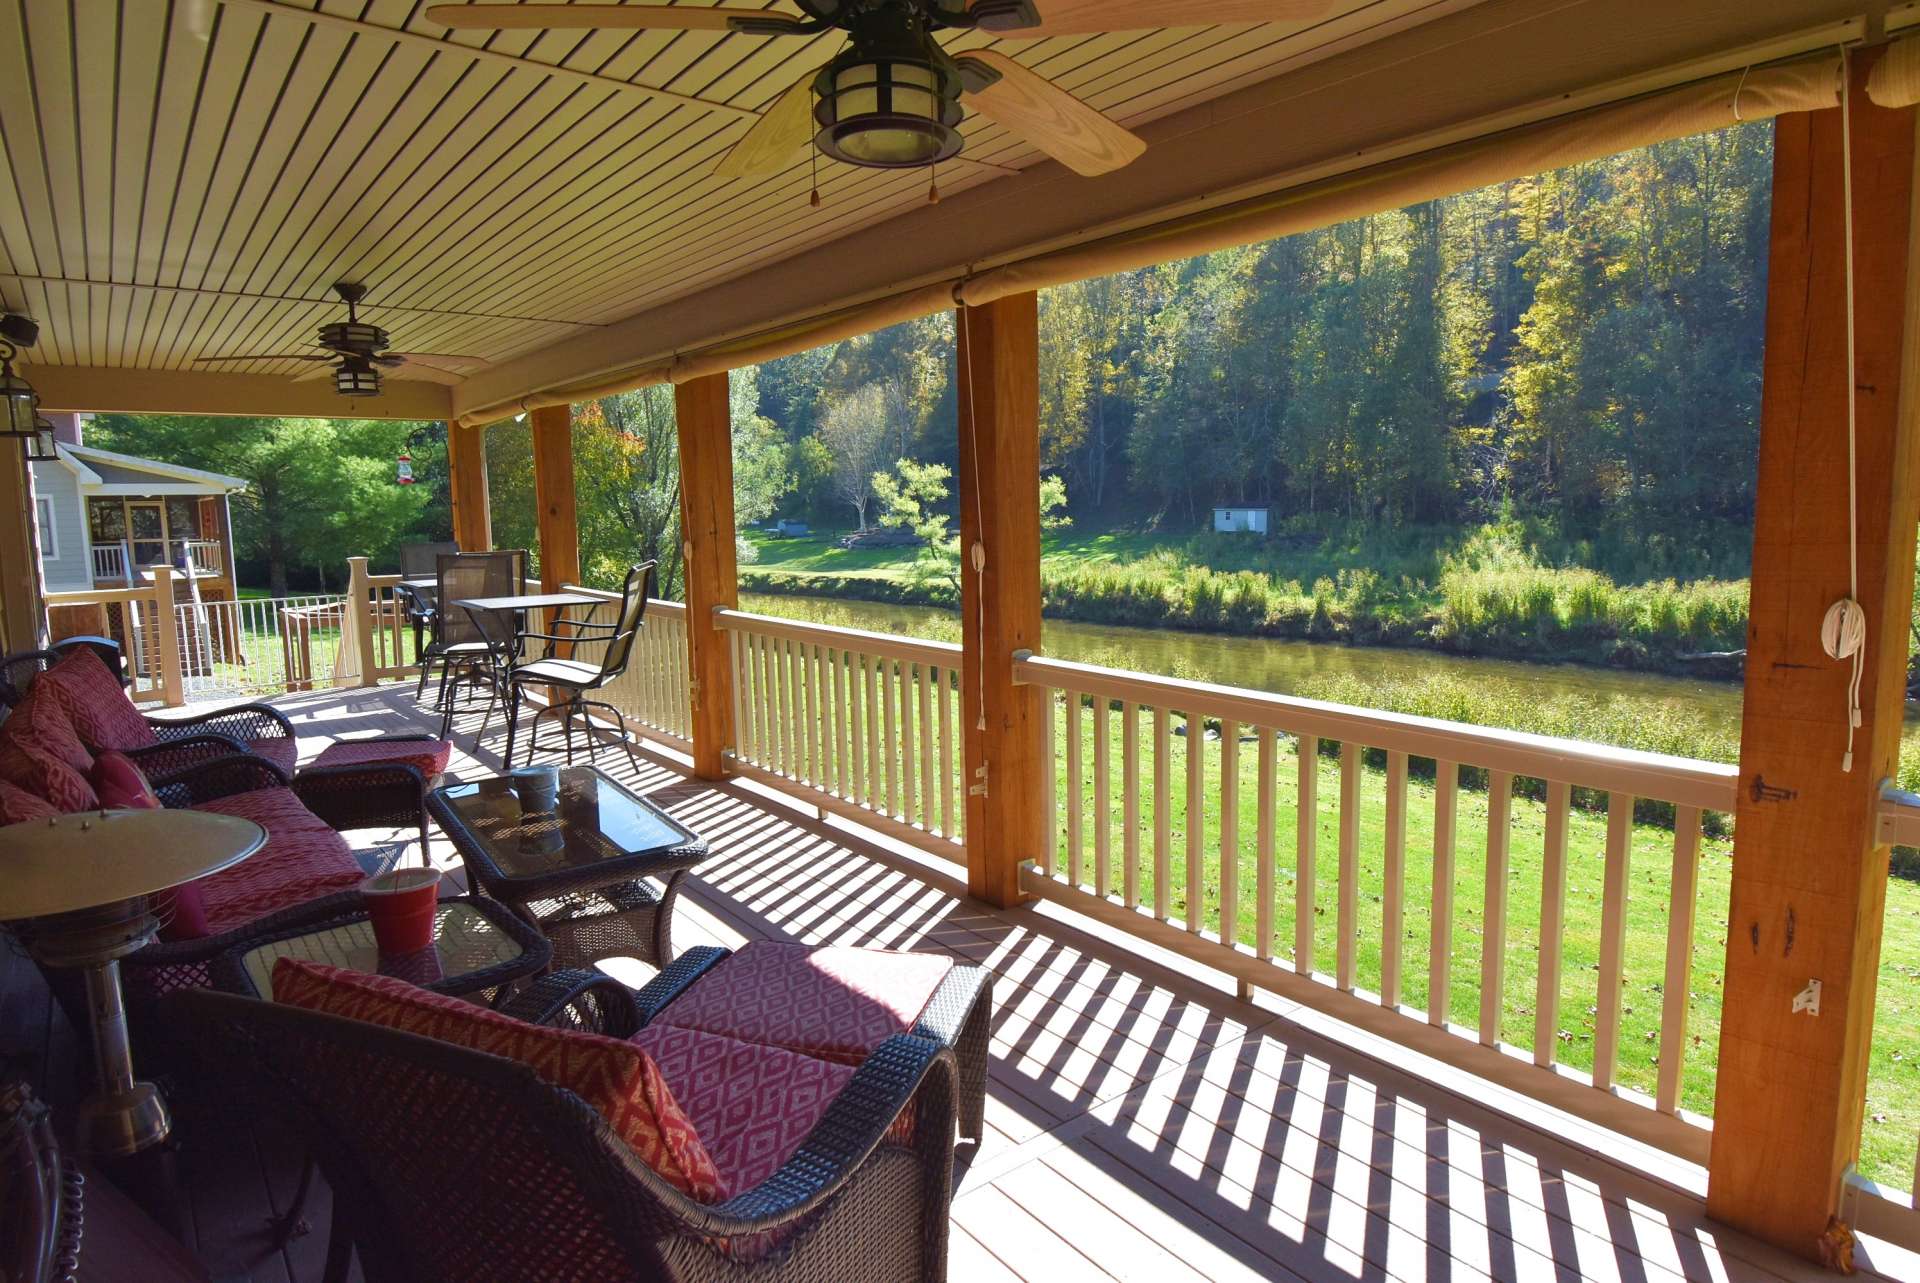 This is the spot! The covered back porch overlooks the level yard and the river just a few feet beyond. This is where you''ll want to settle in to enjoy life in the mountains. Trex decking makes for low maintenance.